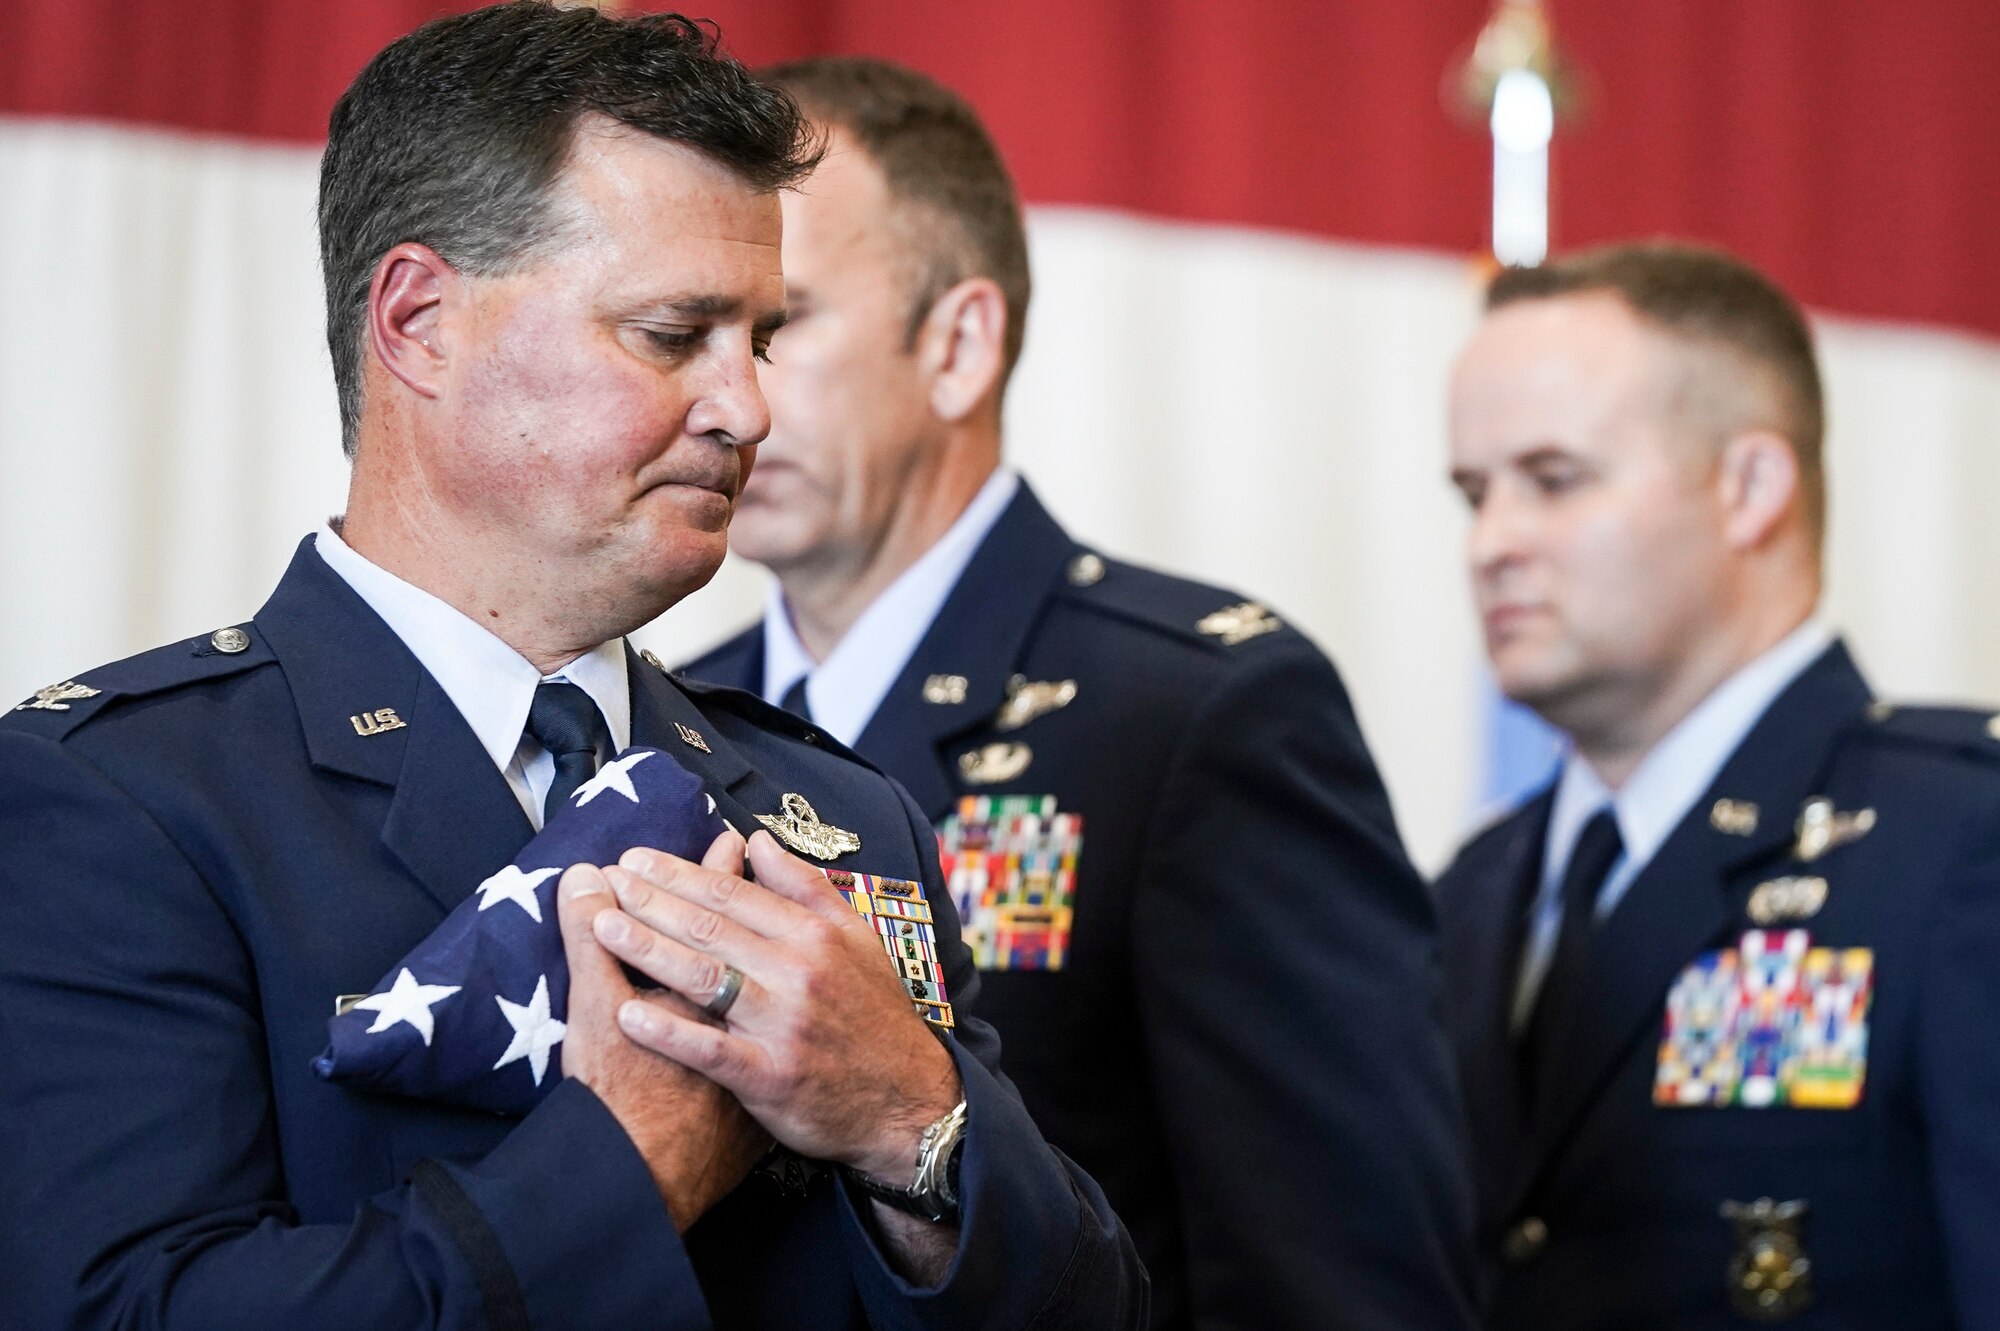 Col. Devin R. Wooden, former 137th Special Operations Wing commander, receives a flag from Airmen that represented each rank of his career during his retirement ceremony at Will Rogers Air National Guard Base, May 5, 2019. Wooden spent his entire career, nearly 33 years, promoting from Airman 1st Class to Colonel in the Oklahoma Air National Guard. (U.S. Air National Guard photo by Staff Sgt. Tyler Woodward)